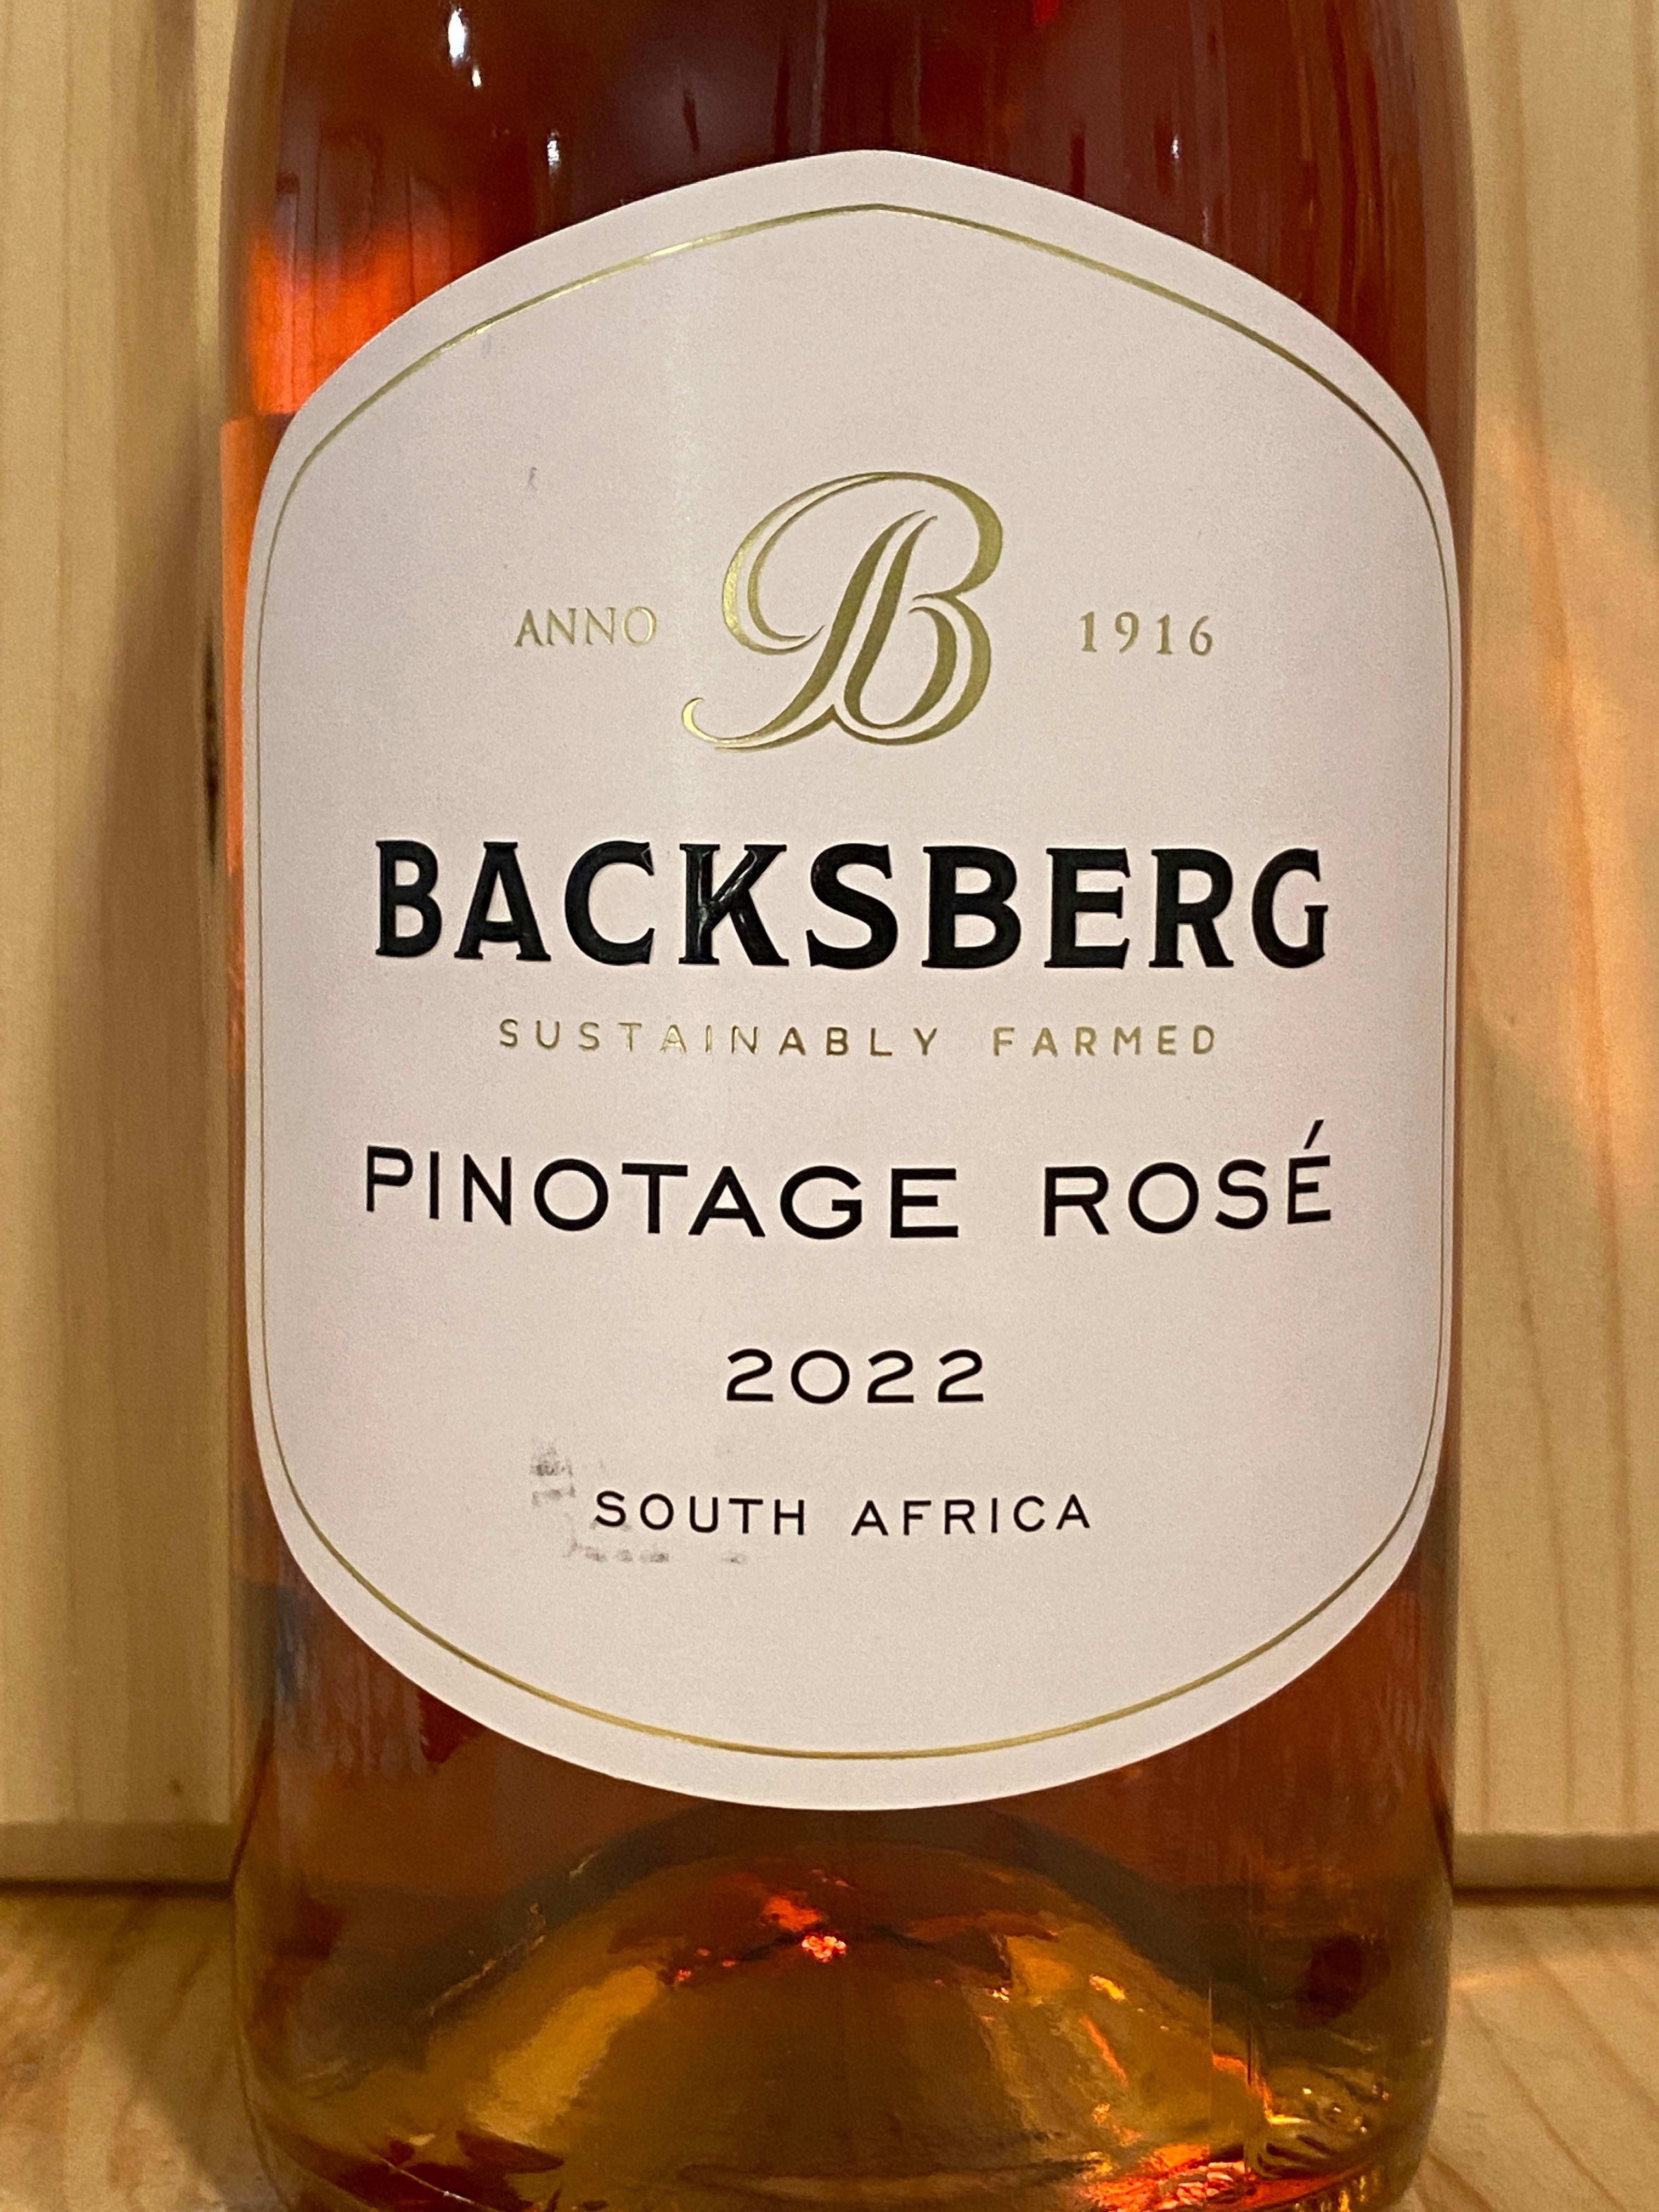 Backsberg Pinotage Rosé 2022: Paarl, Western Cape, South Africa